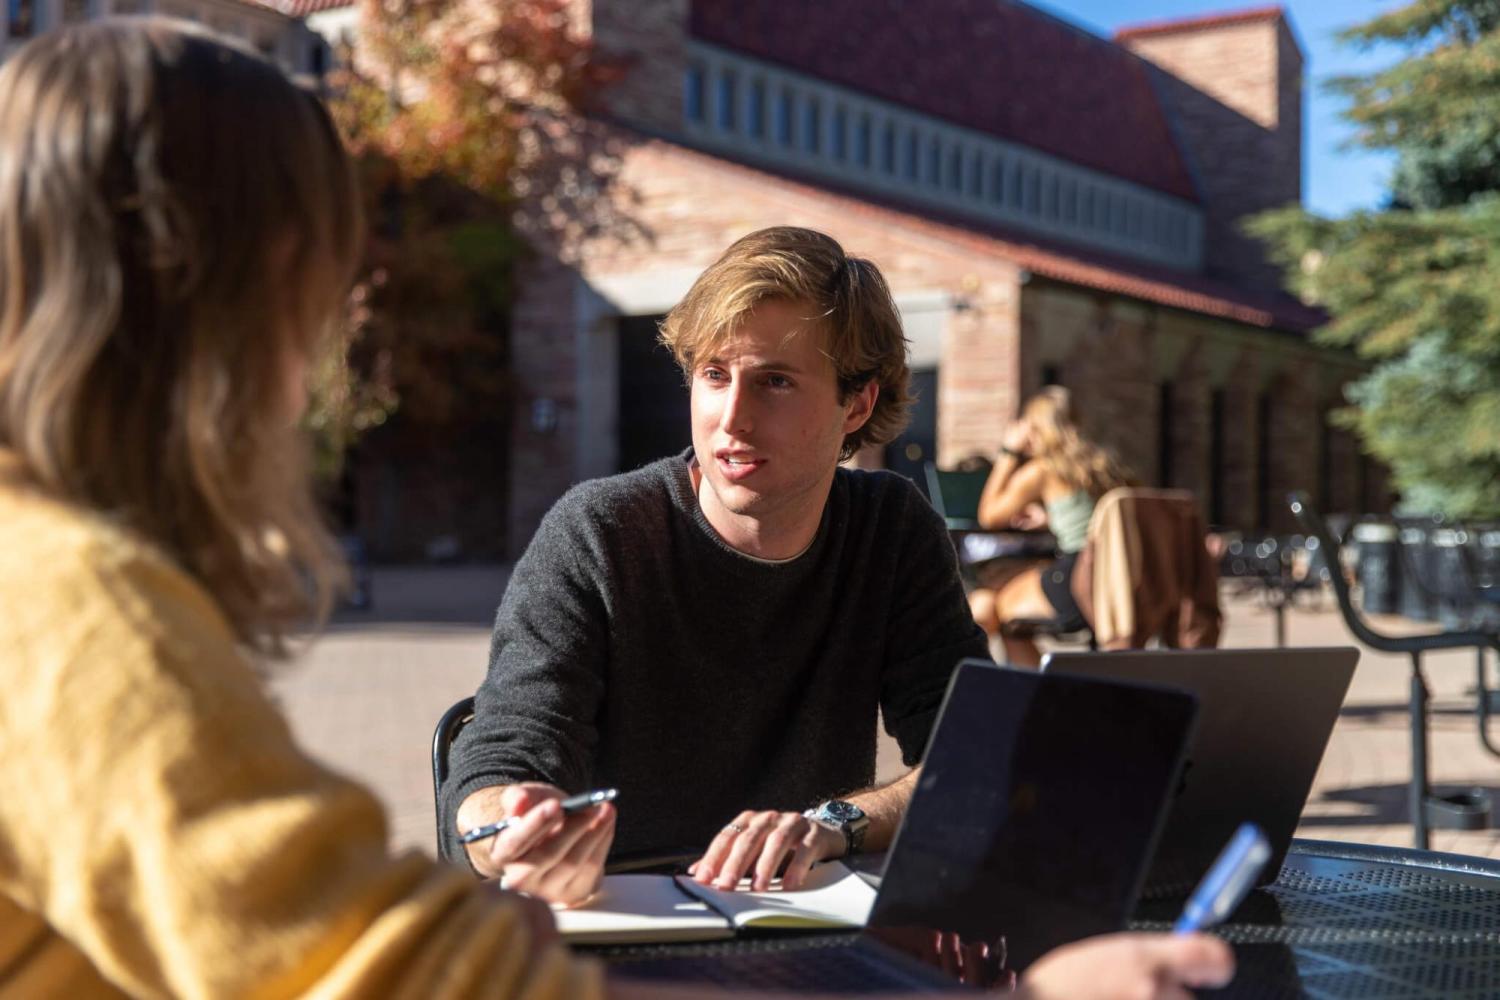 Two students talk together at an outdoor table on campus while using their laptops and writing on their notepads